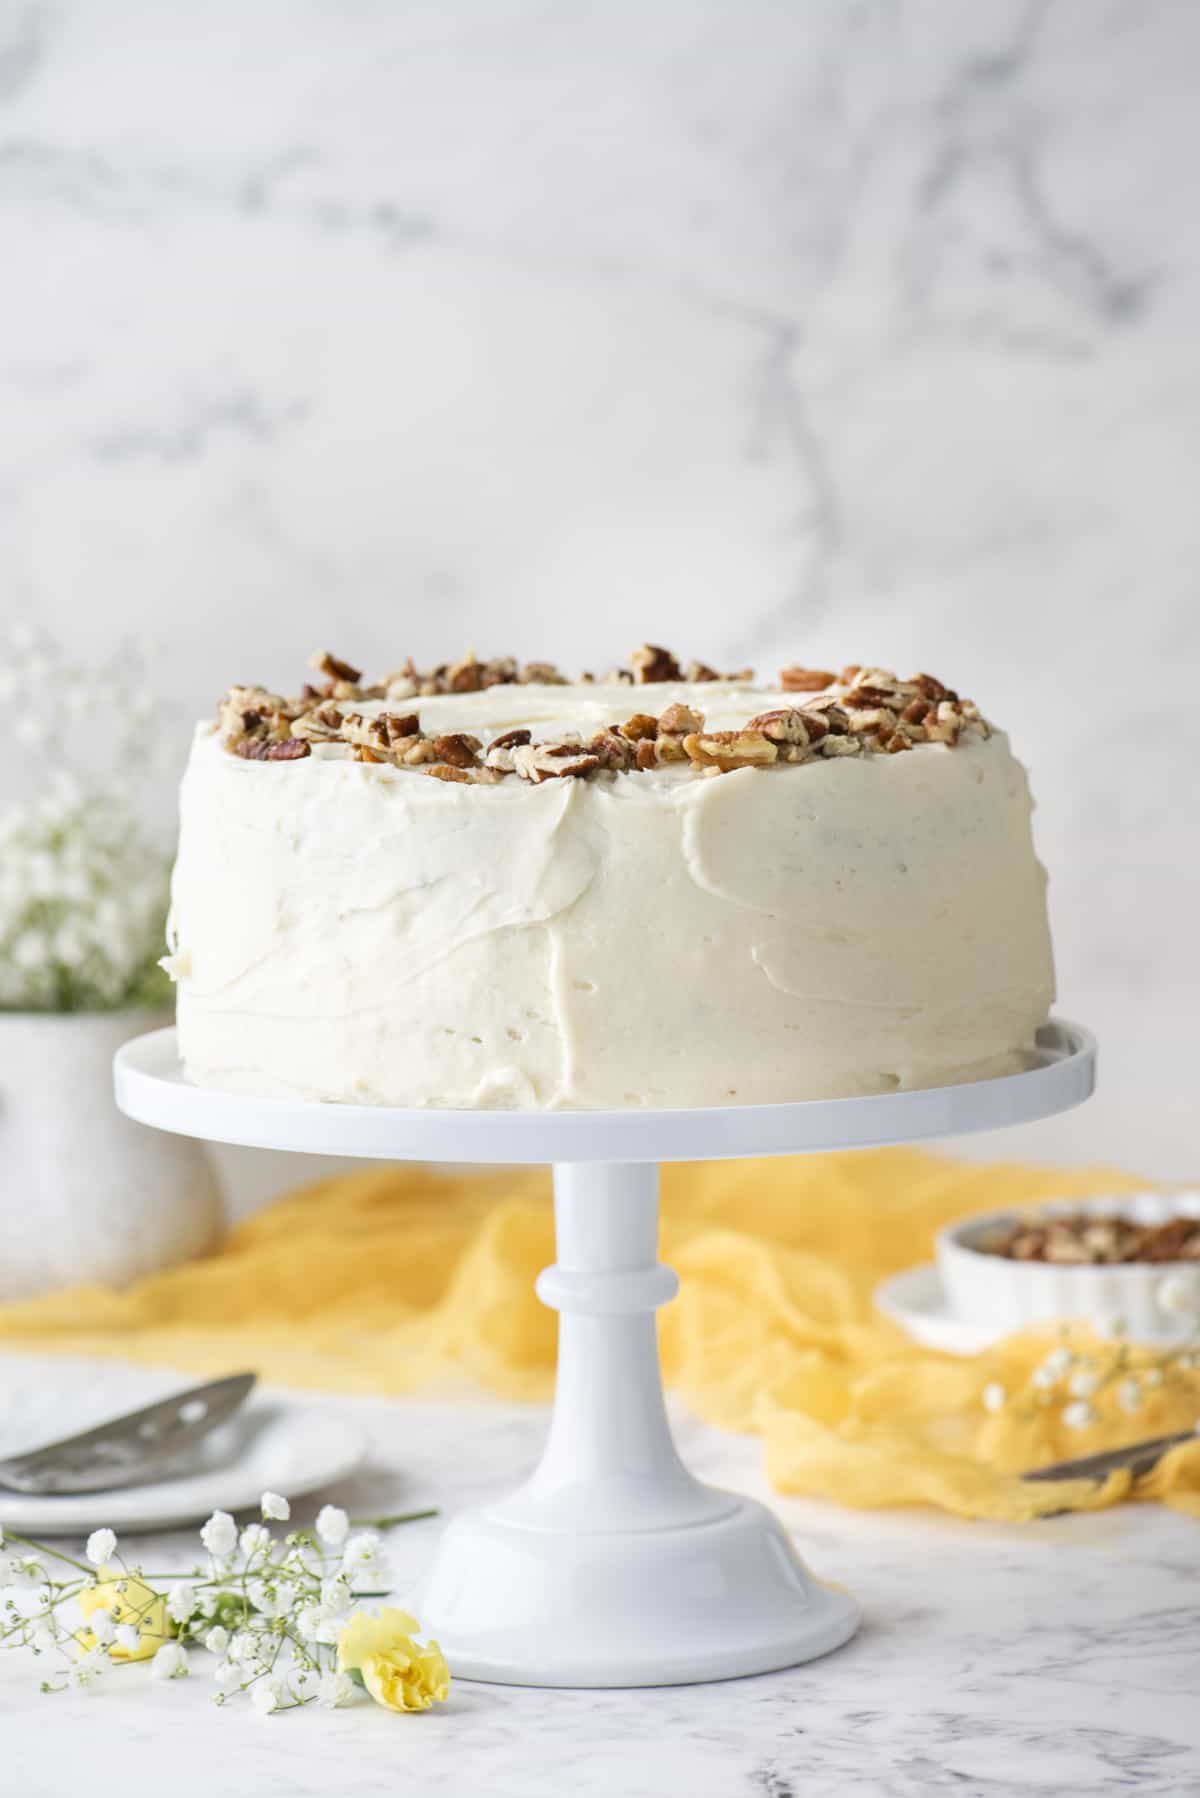 a hummingbird cake covered in cream cheese frosting and topped with chopped pecans on a white cake stand surrounded by white and yellow flowers, a yellow cloth and a bowl of pecans in the background